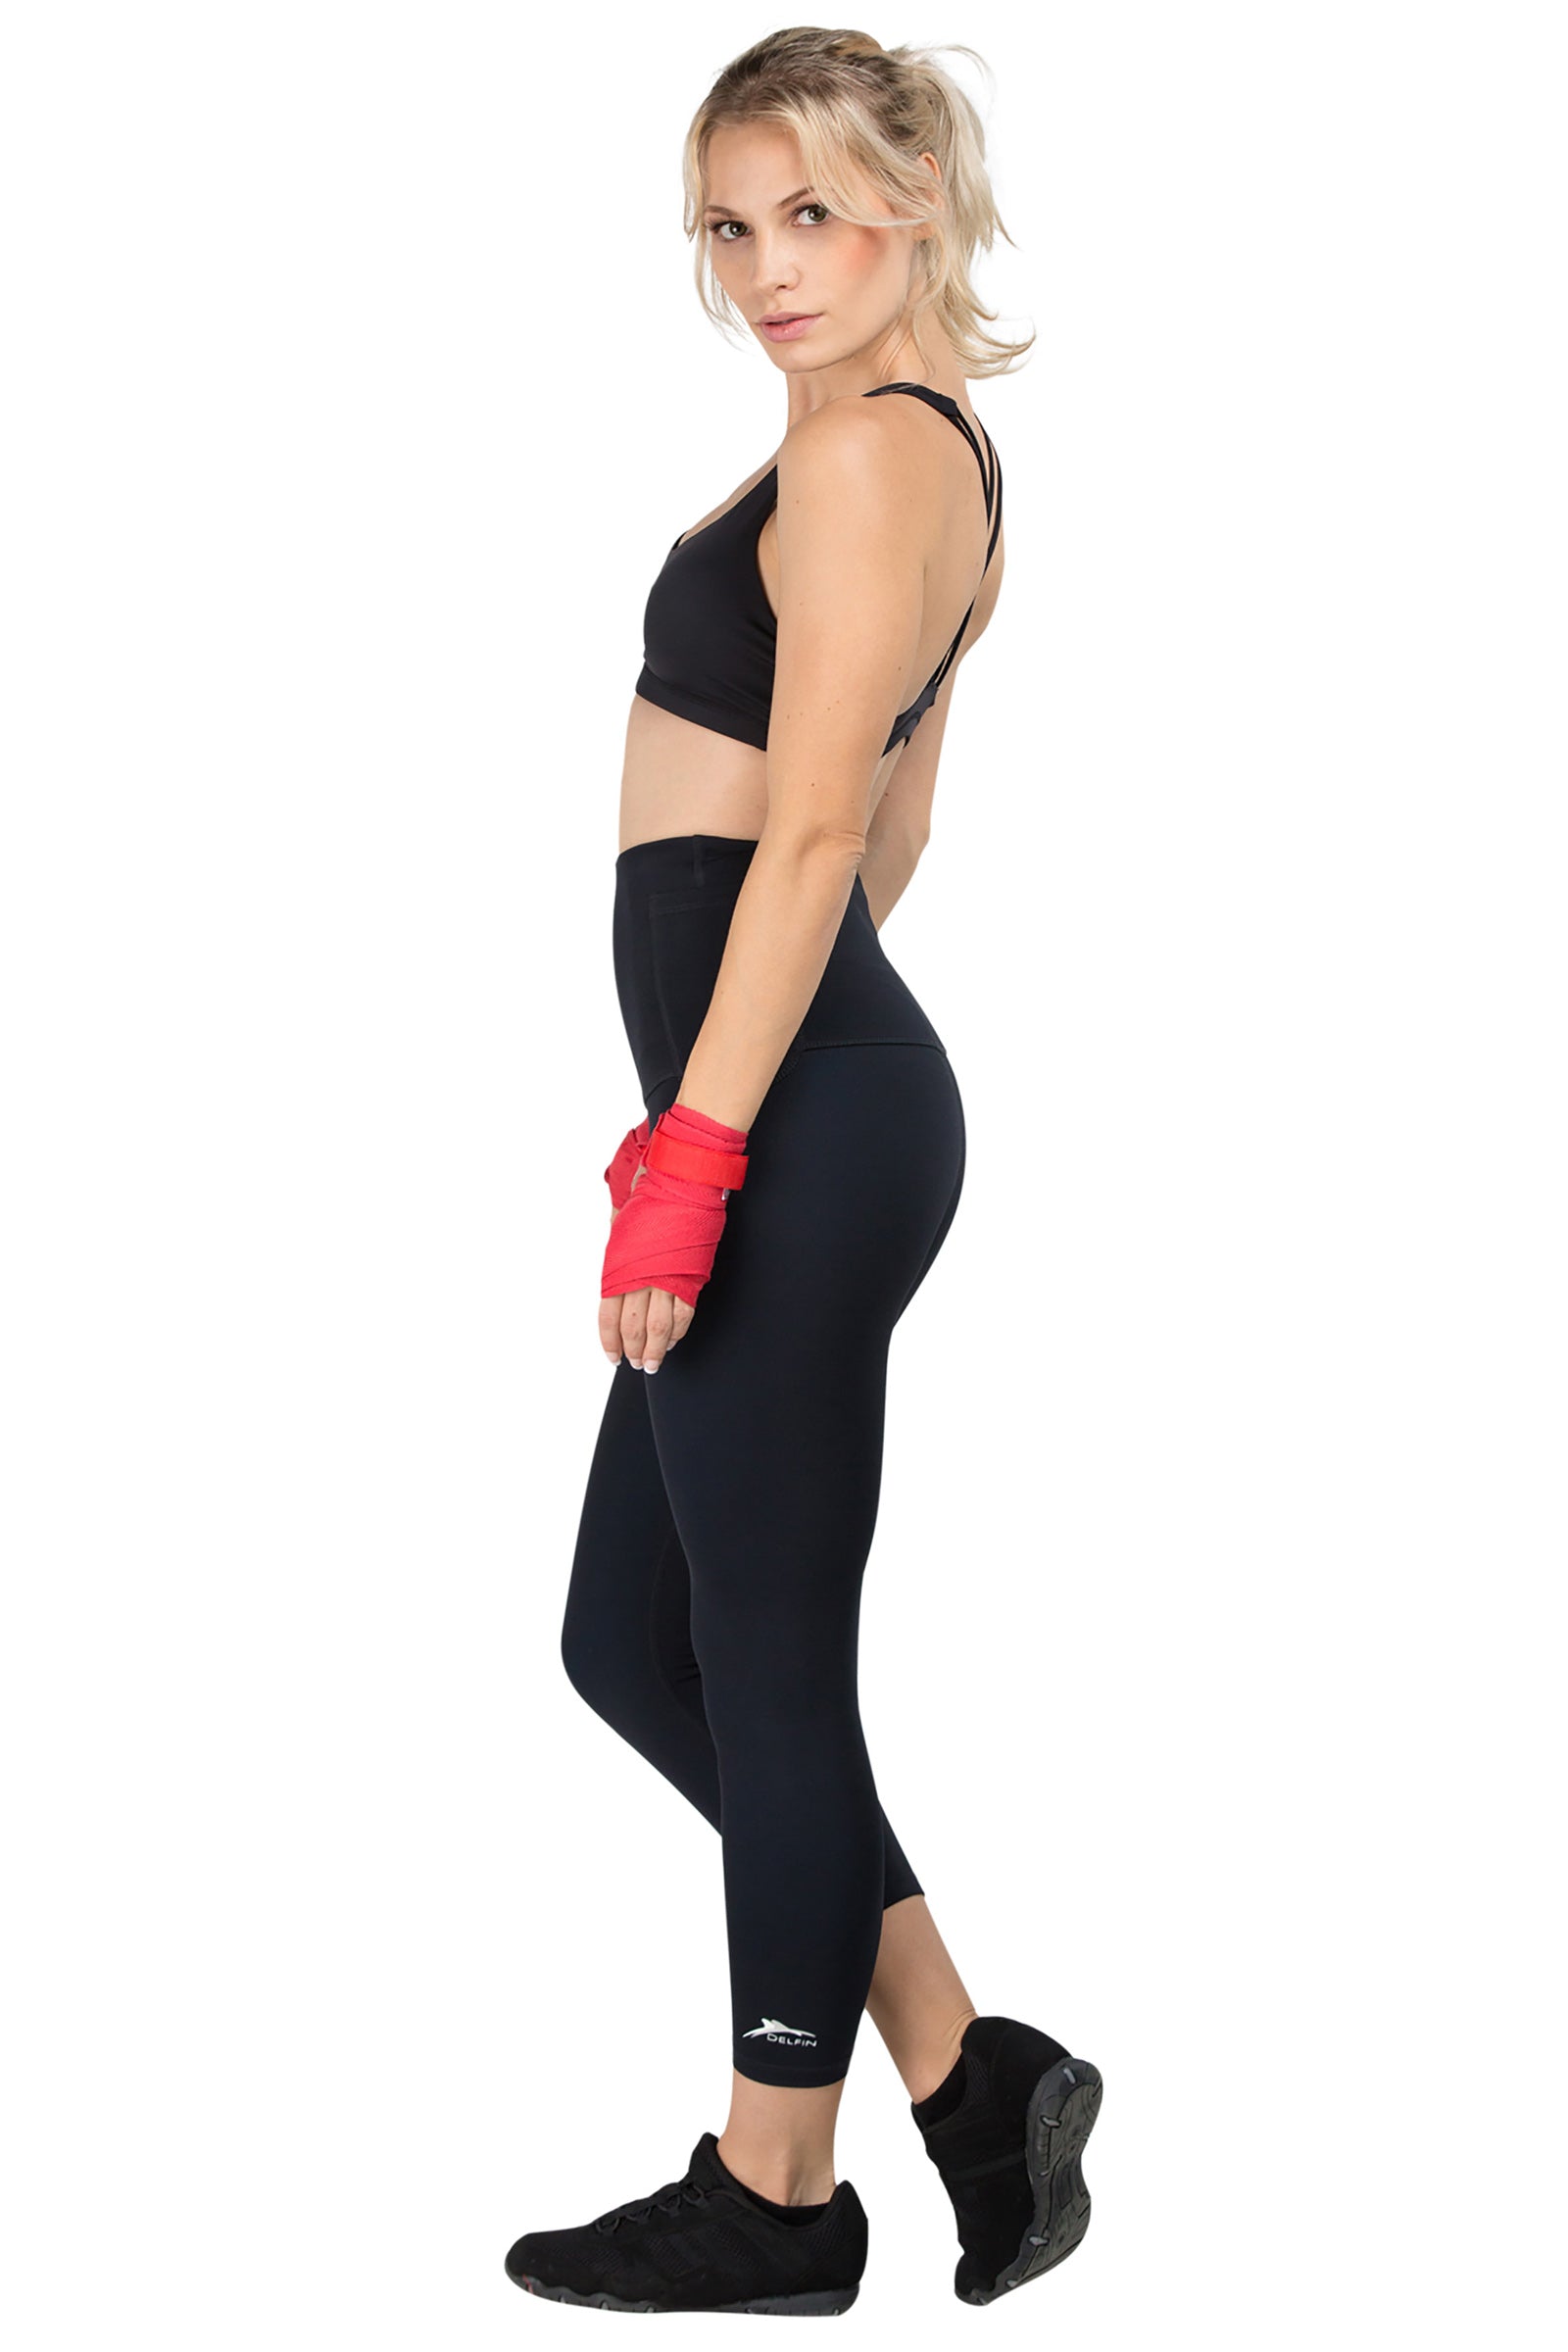 Mineral Infused High Waist Exercise Capris - Black - Delfin Brands